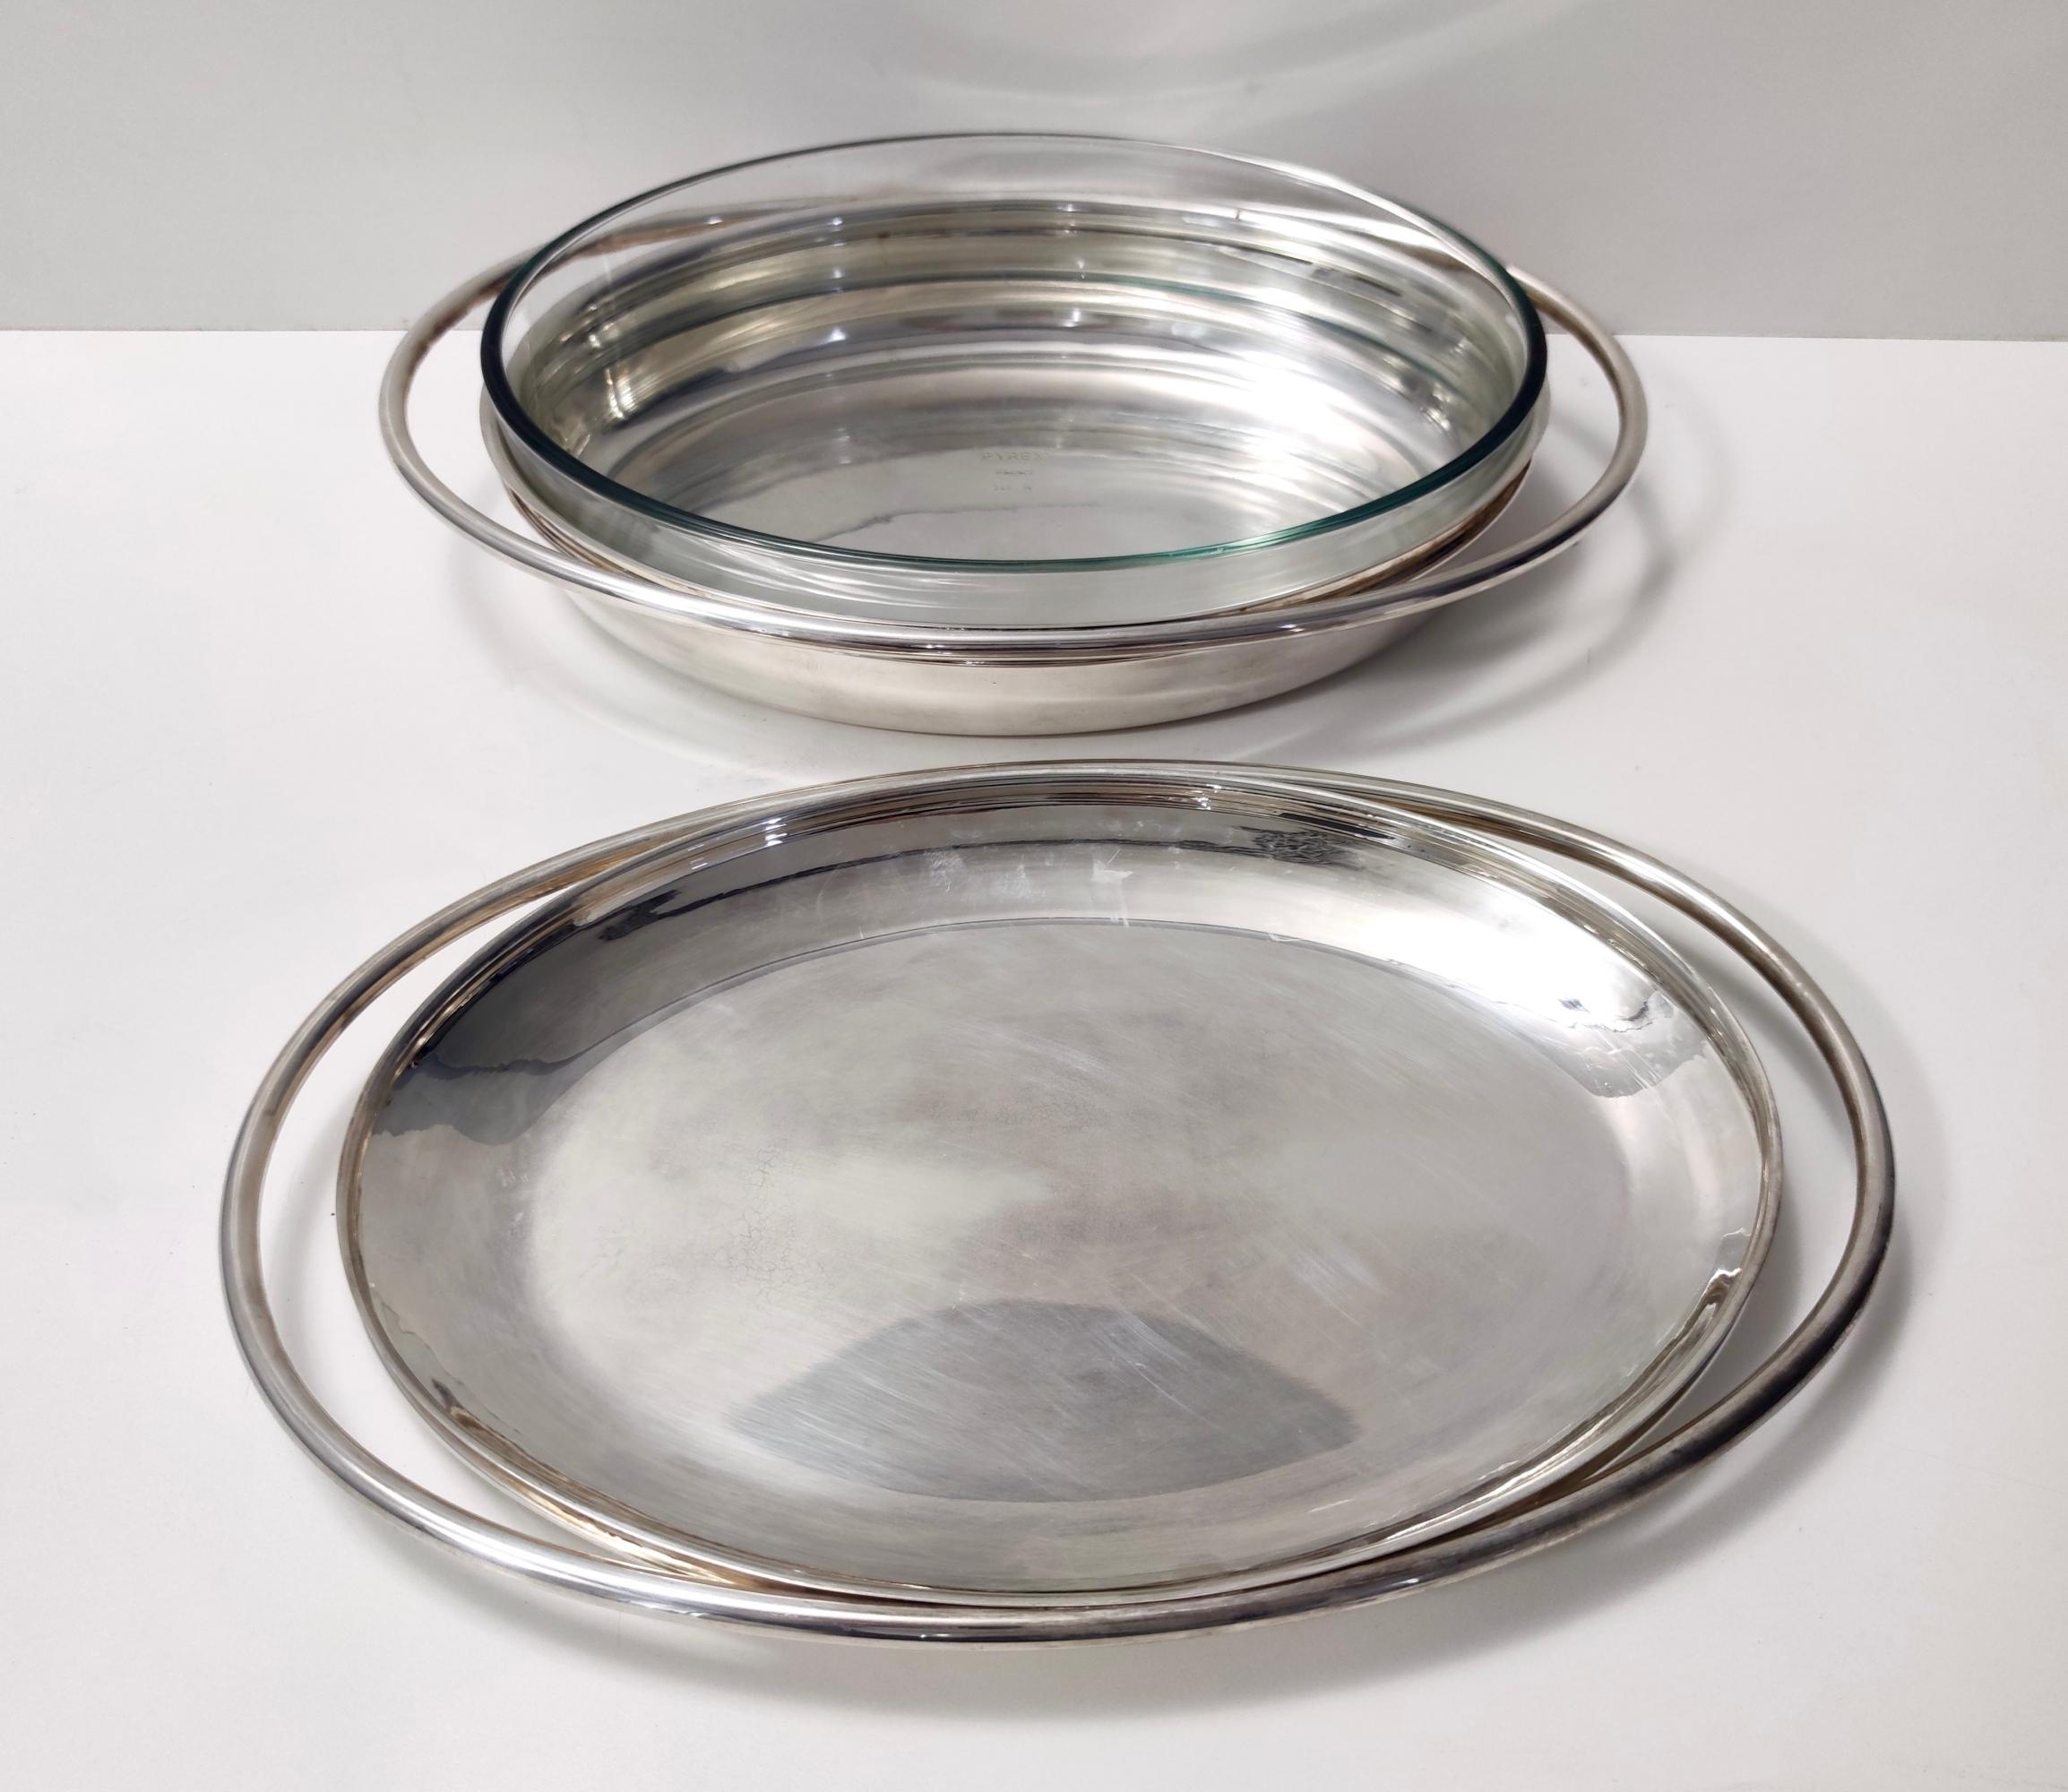 Post-Modern Silver Plated Venison Dish with Pyrex Glass Casserole Dish by Sabattini, Italy For Sale